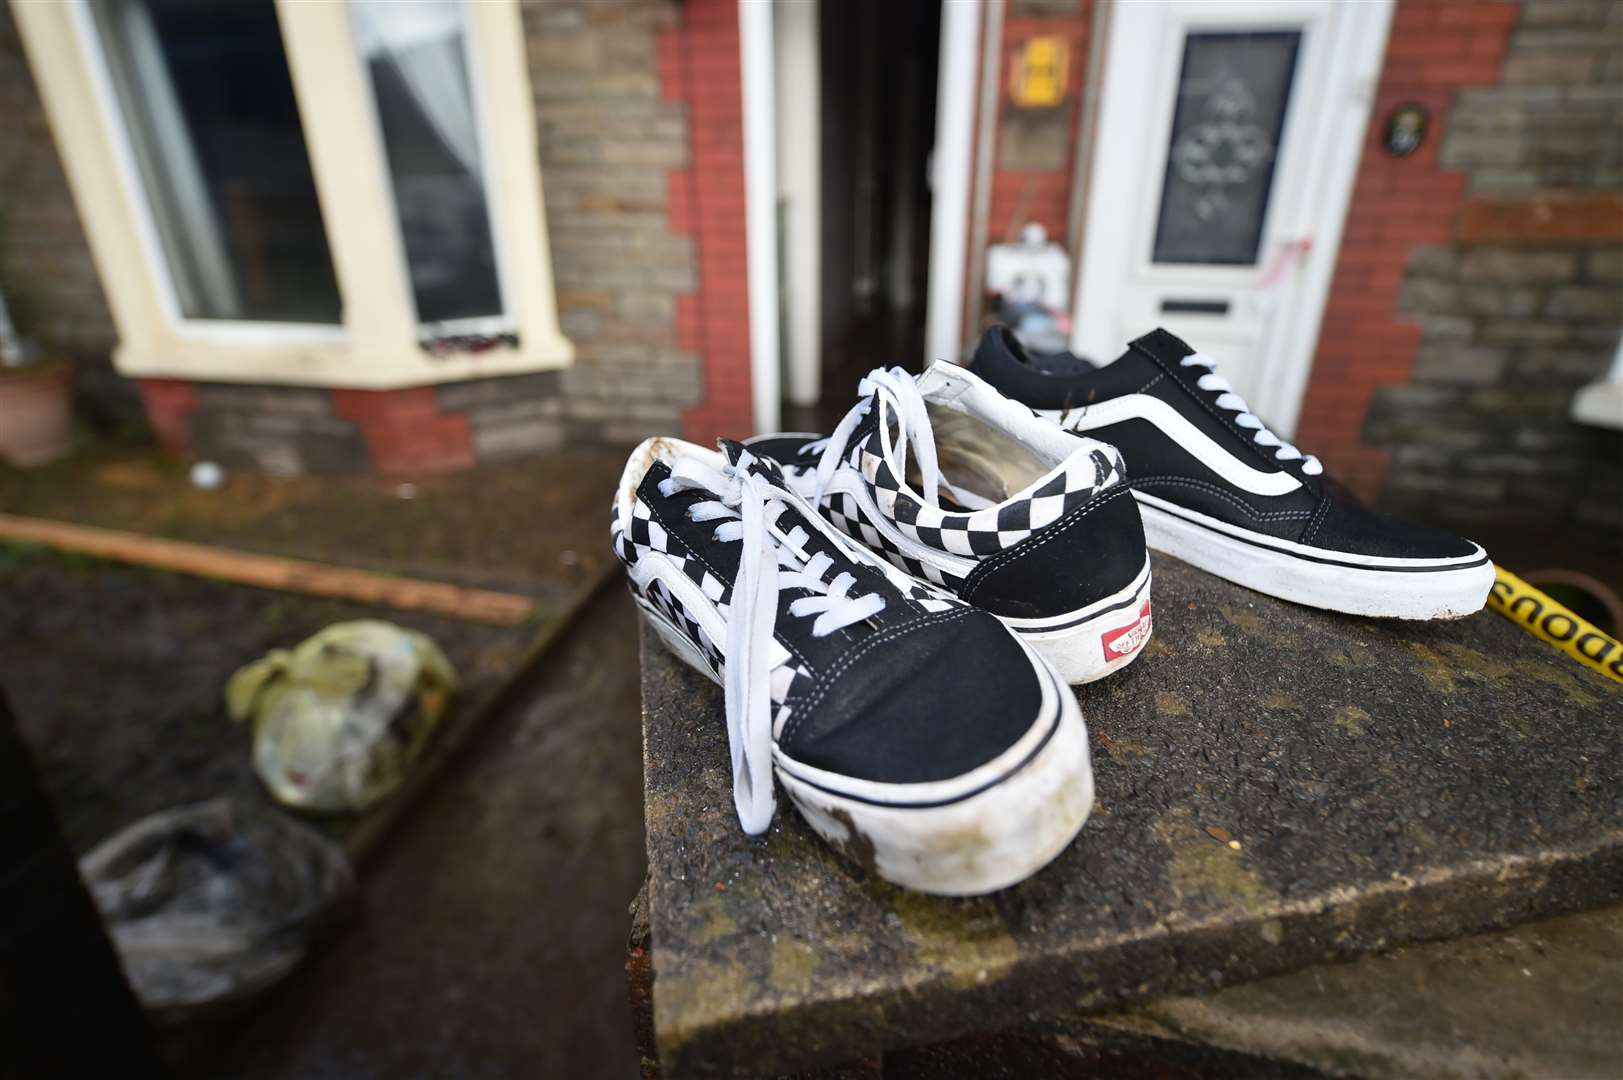 A pair of Vans trainers are left to dry out on a wall outside a property on Oxford Street, Nantgarw (Ben Birchall/PA)